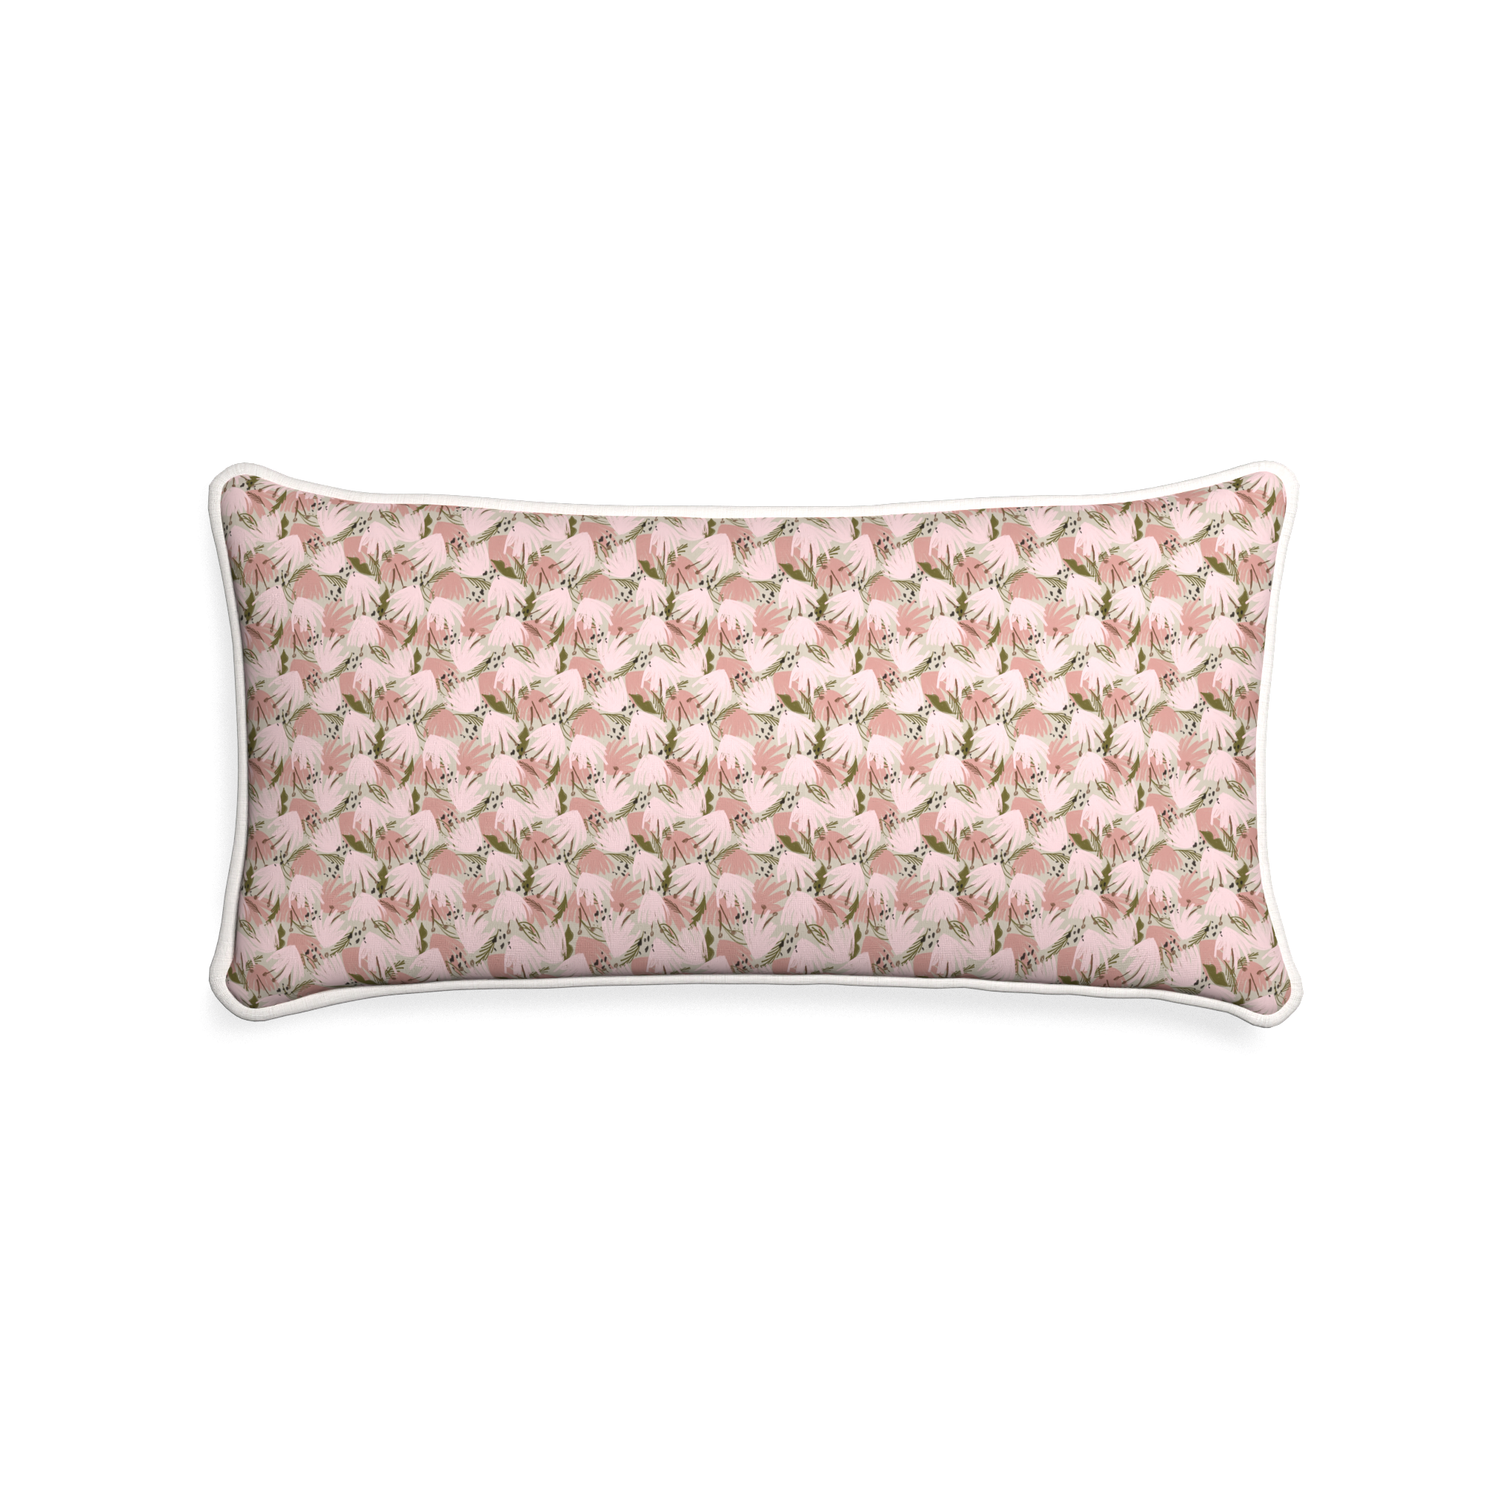 Midi-lumbar eden pink custom pink floralpillow with snow piping on white background